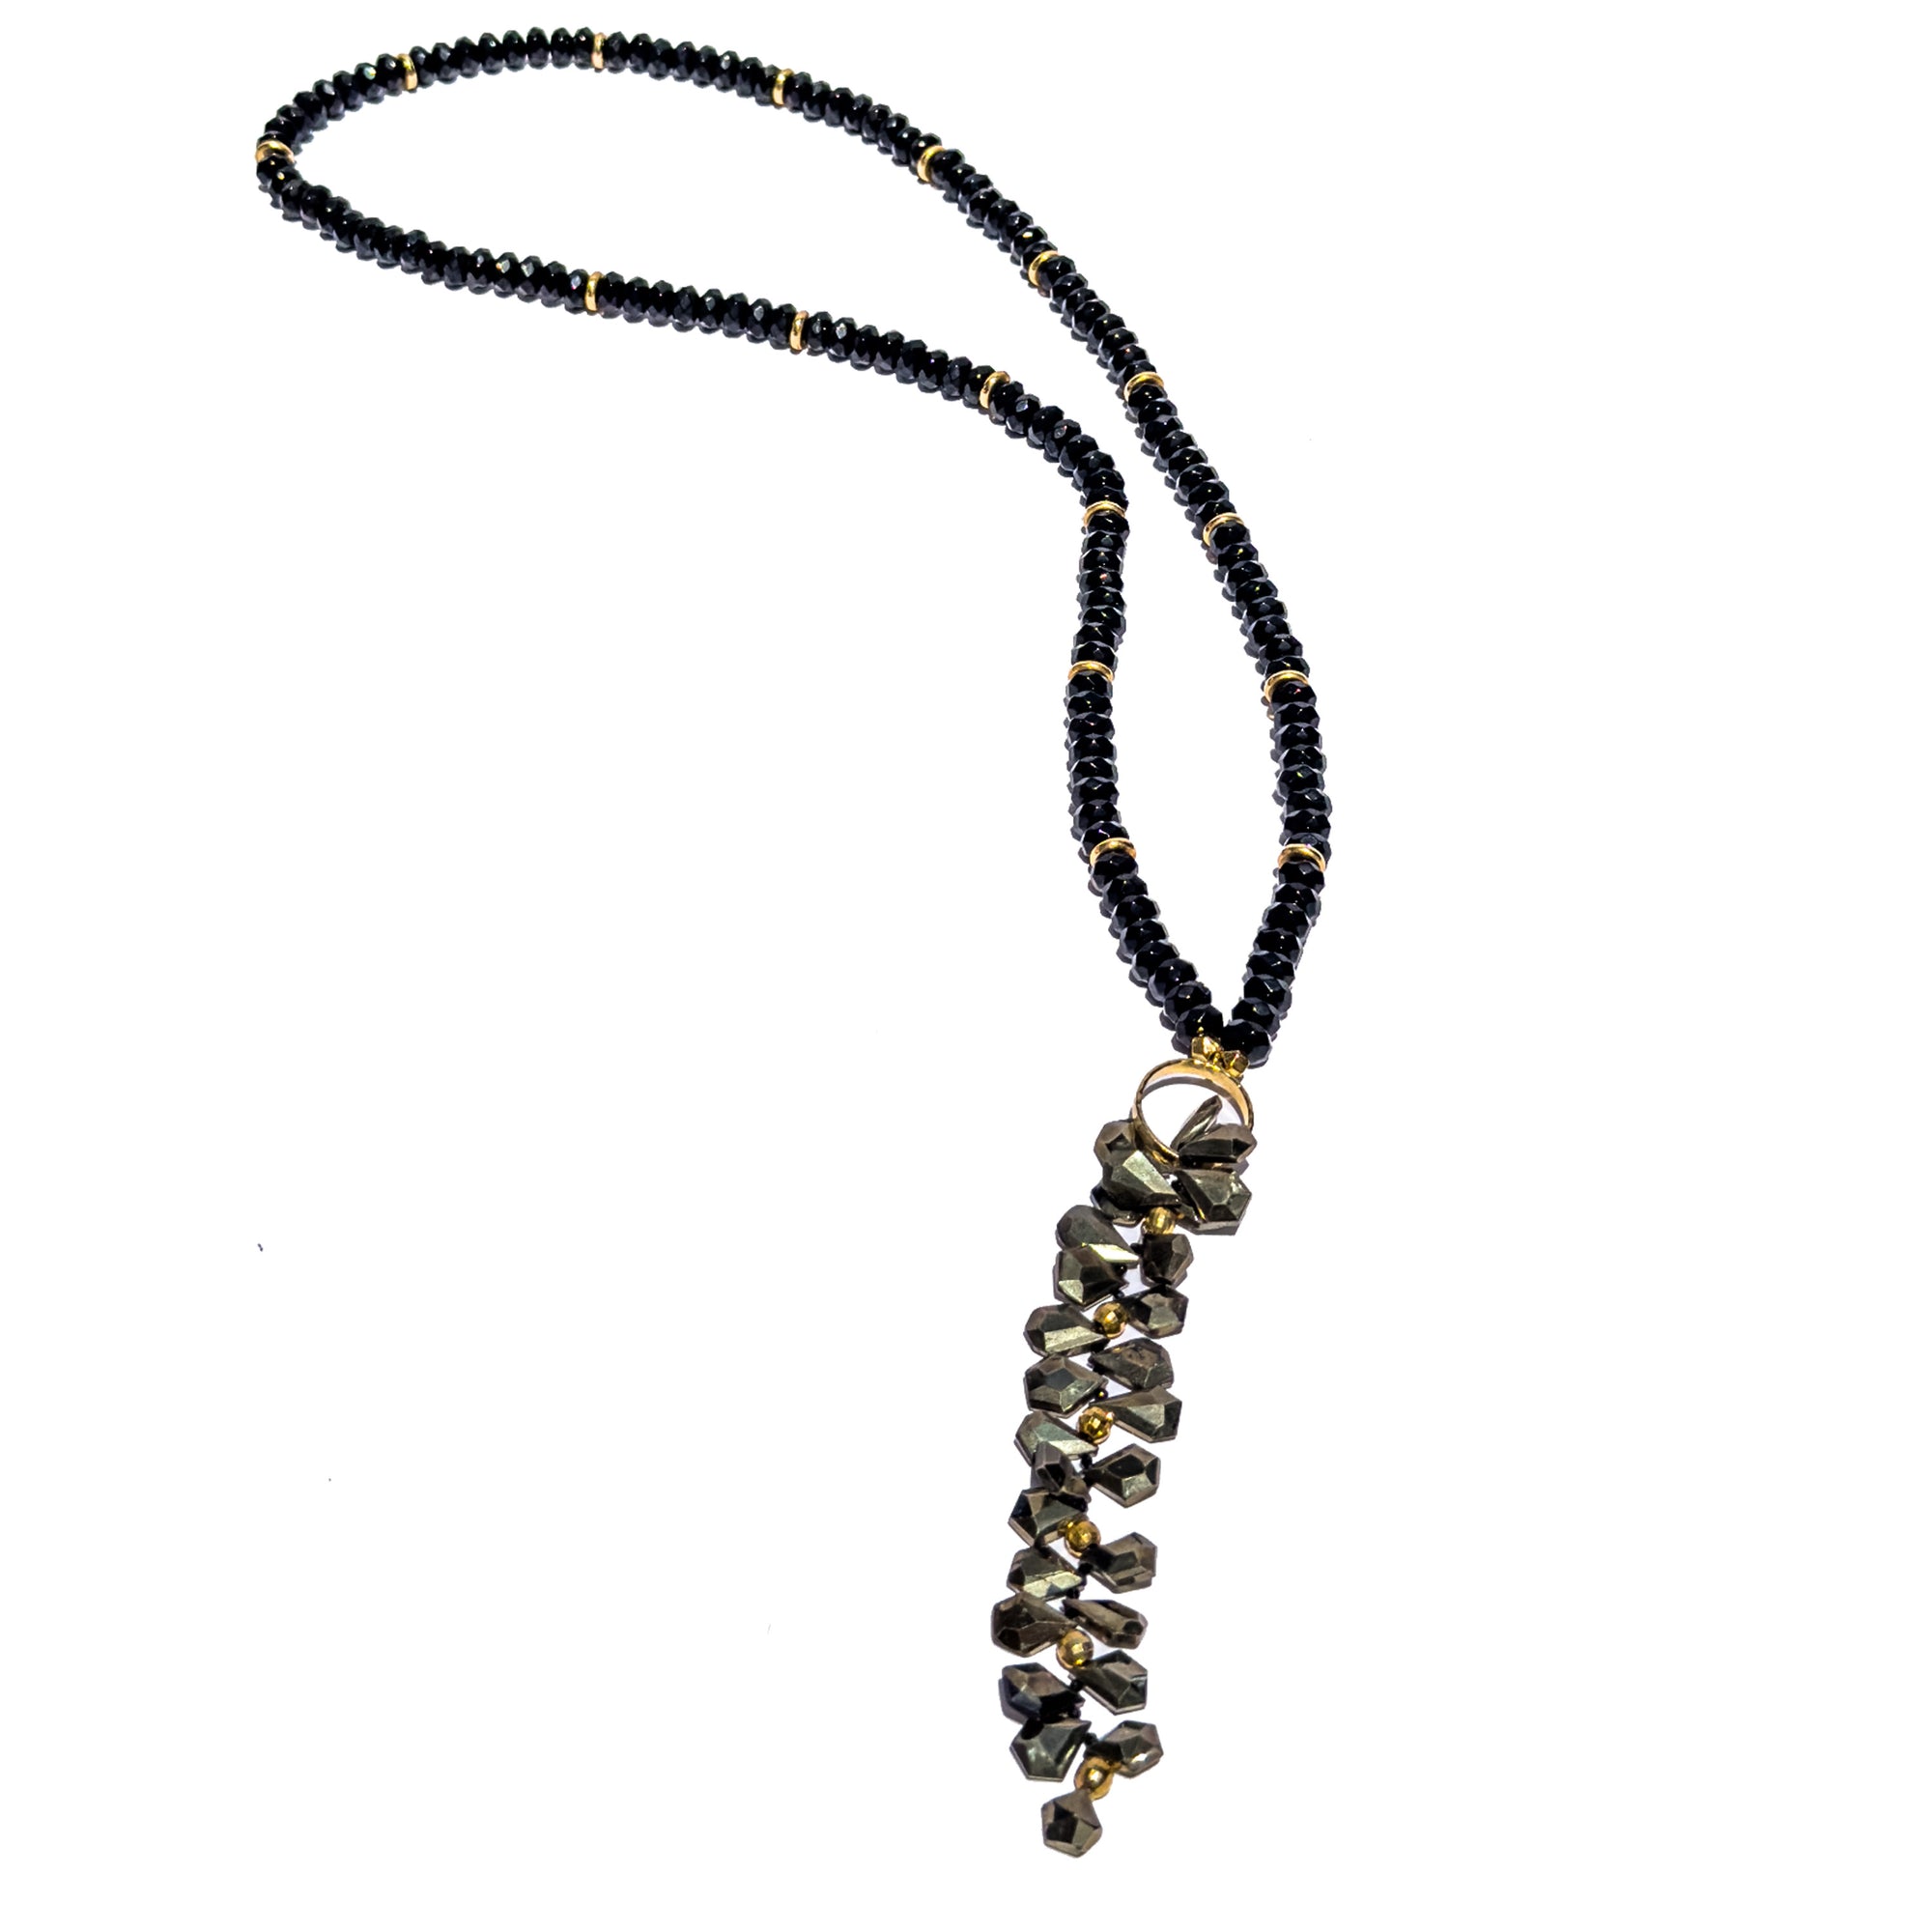 Long Statement Necklace: 24K GV, Faceted Black Onyx & Tassel with Rare Pyrite Tears, Black Diamonds & faceted 24K GV Spheres